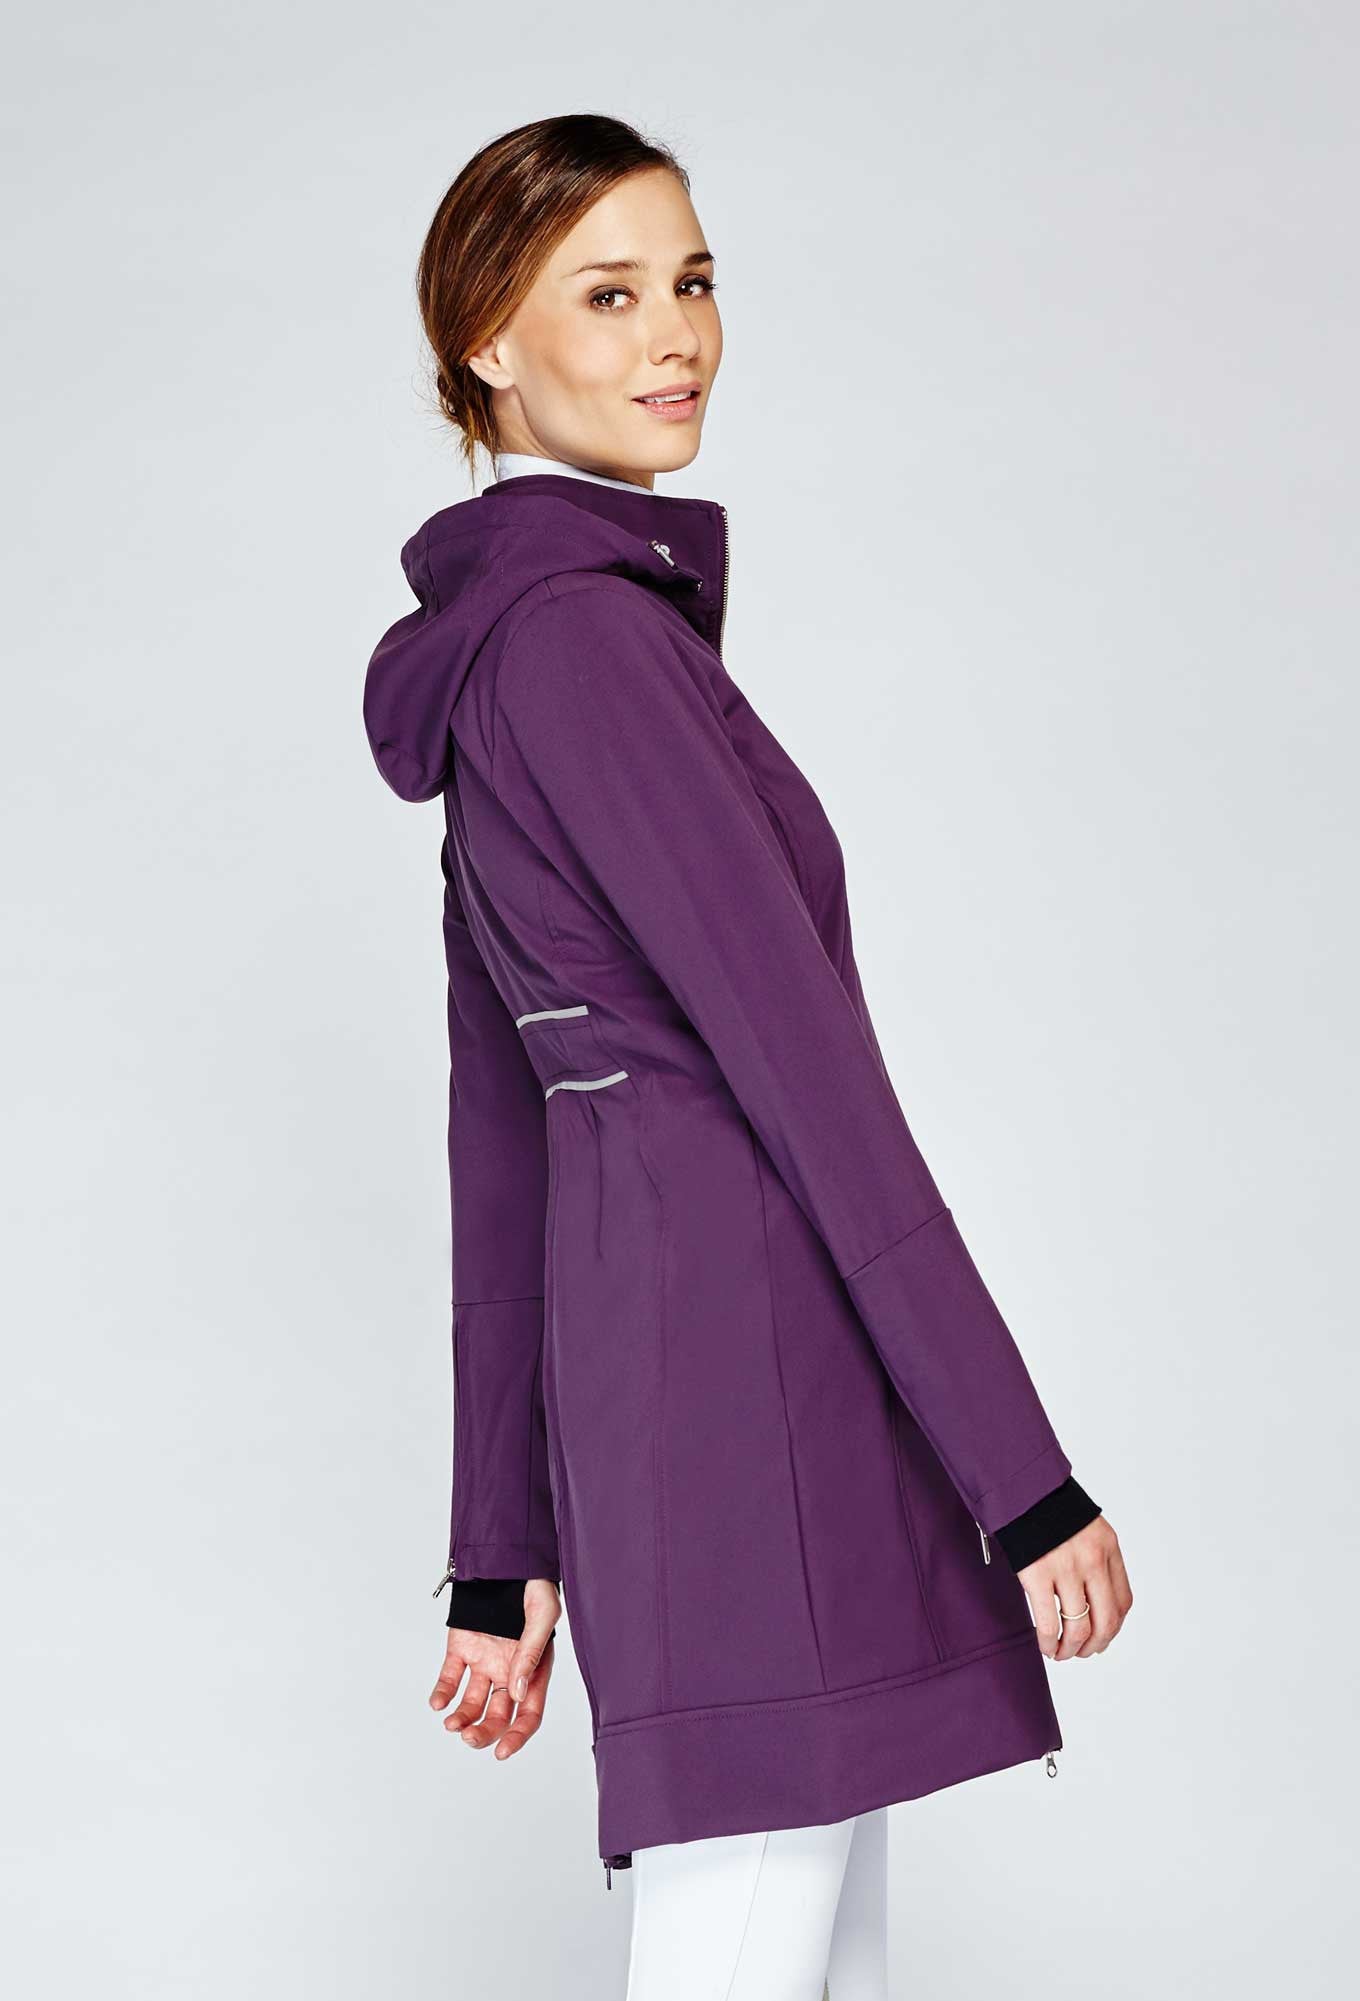 Noel Asmar Special Edition All Weather Rider Lightweight - Plum - Uptown E Store